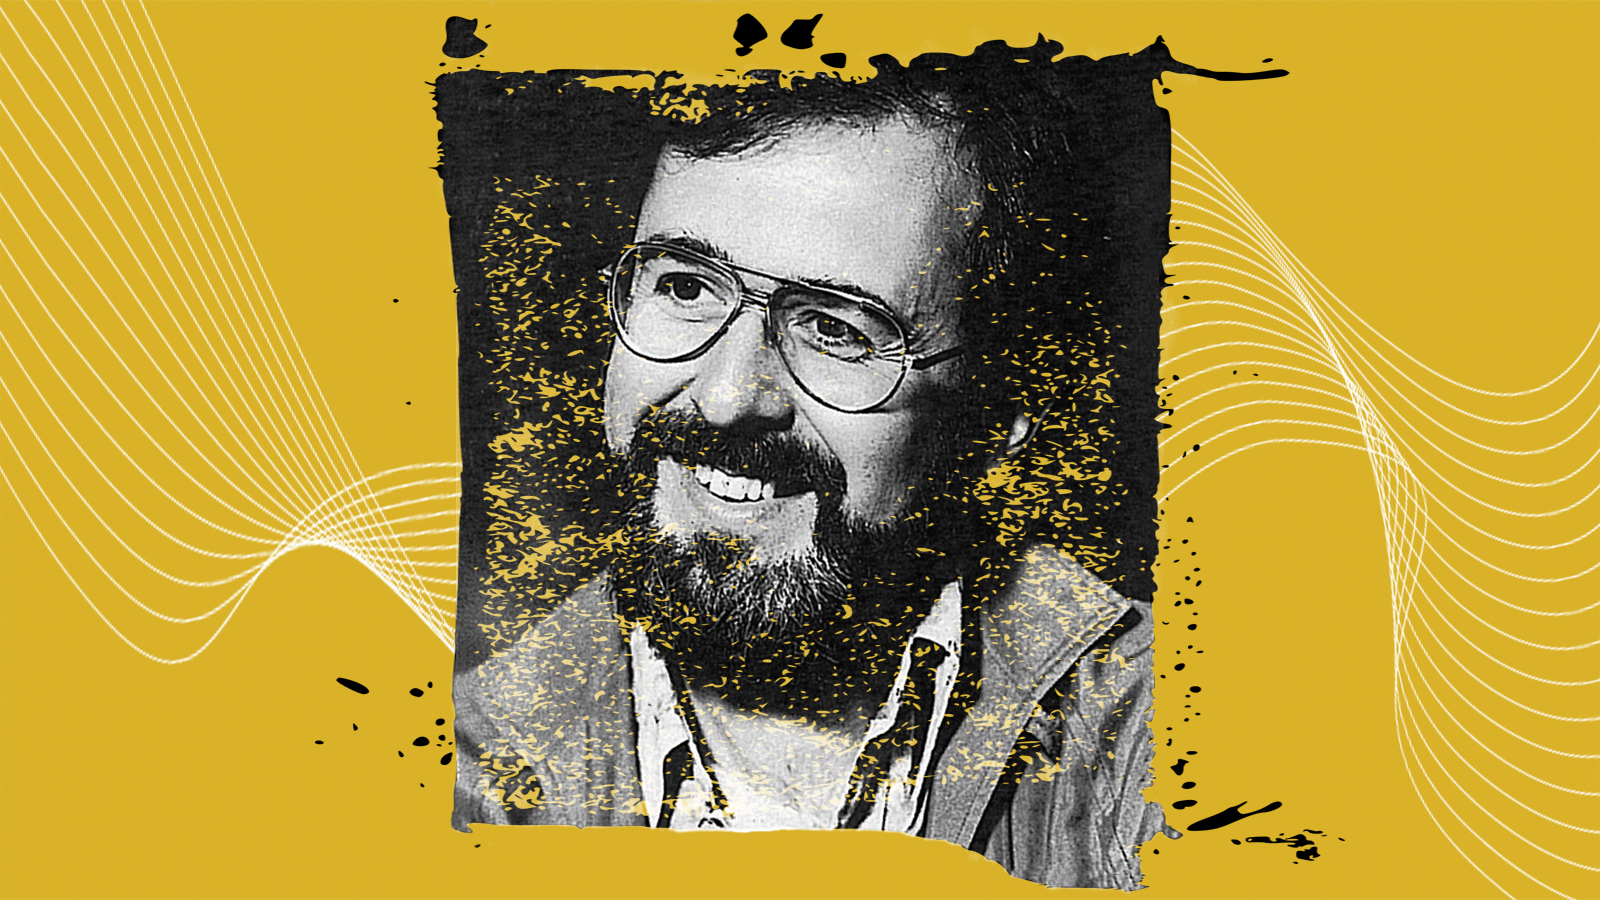 illustration of Bob James on a yellow background with soundwaves